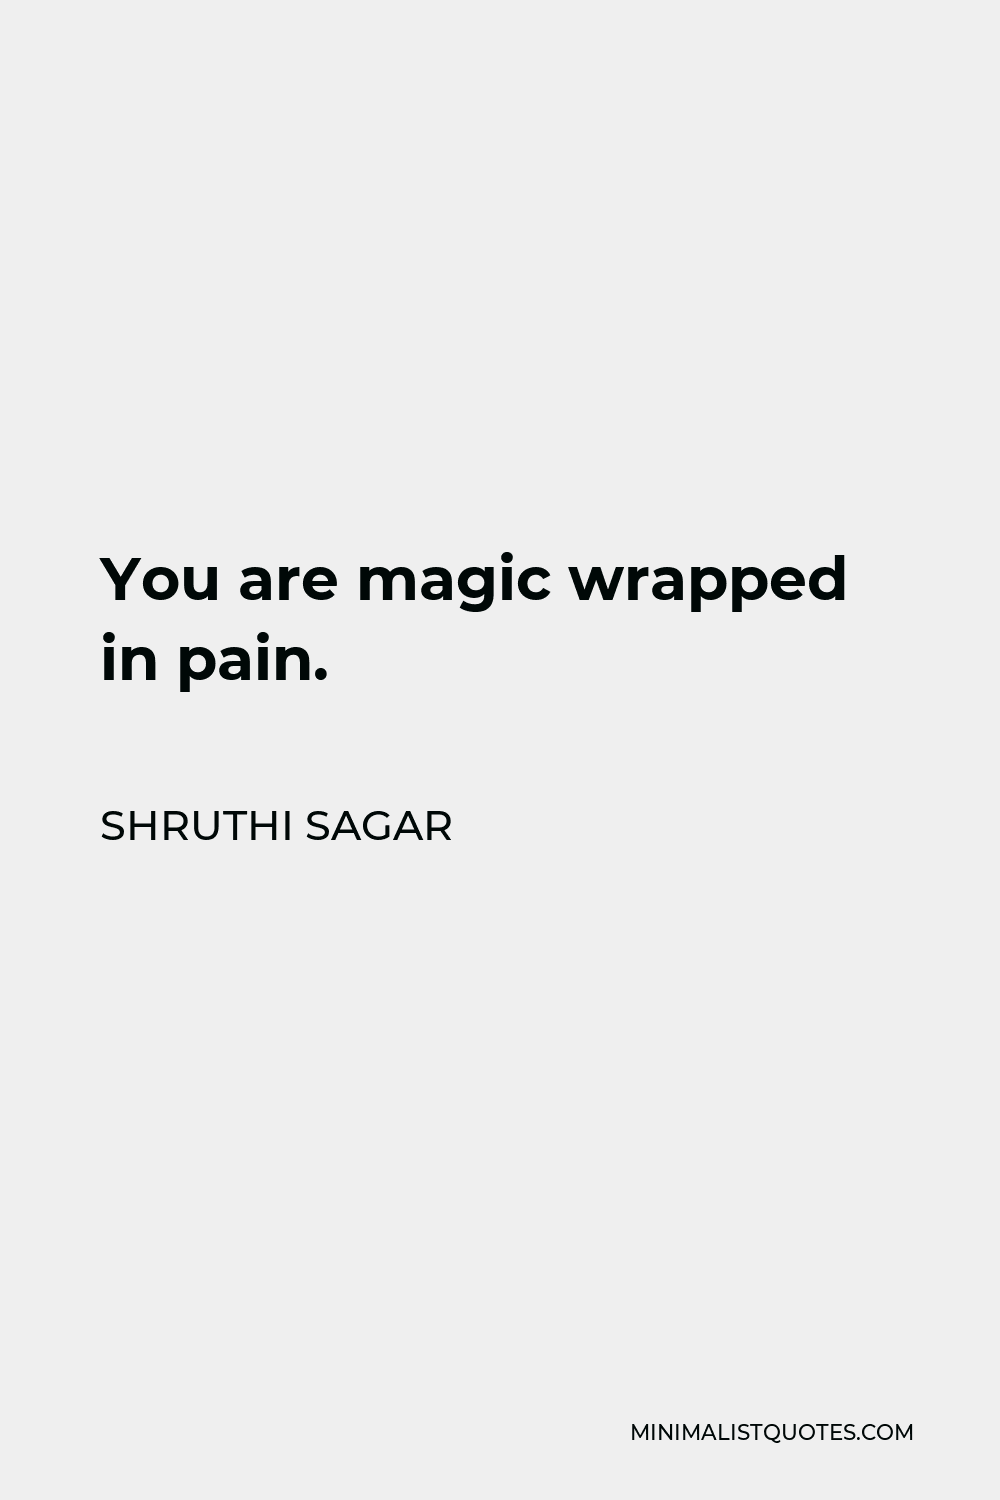 Shruthi Sagar Quote - You are magic wrapped in pain.